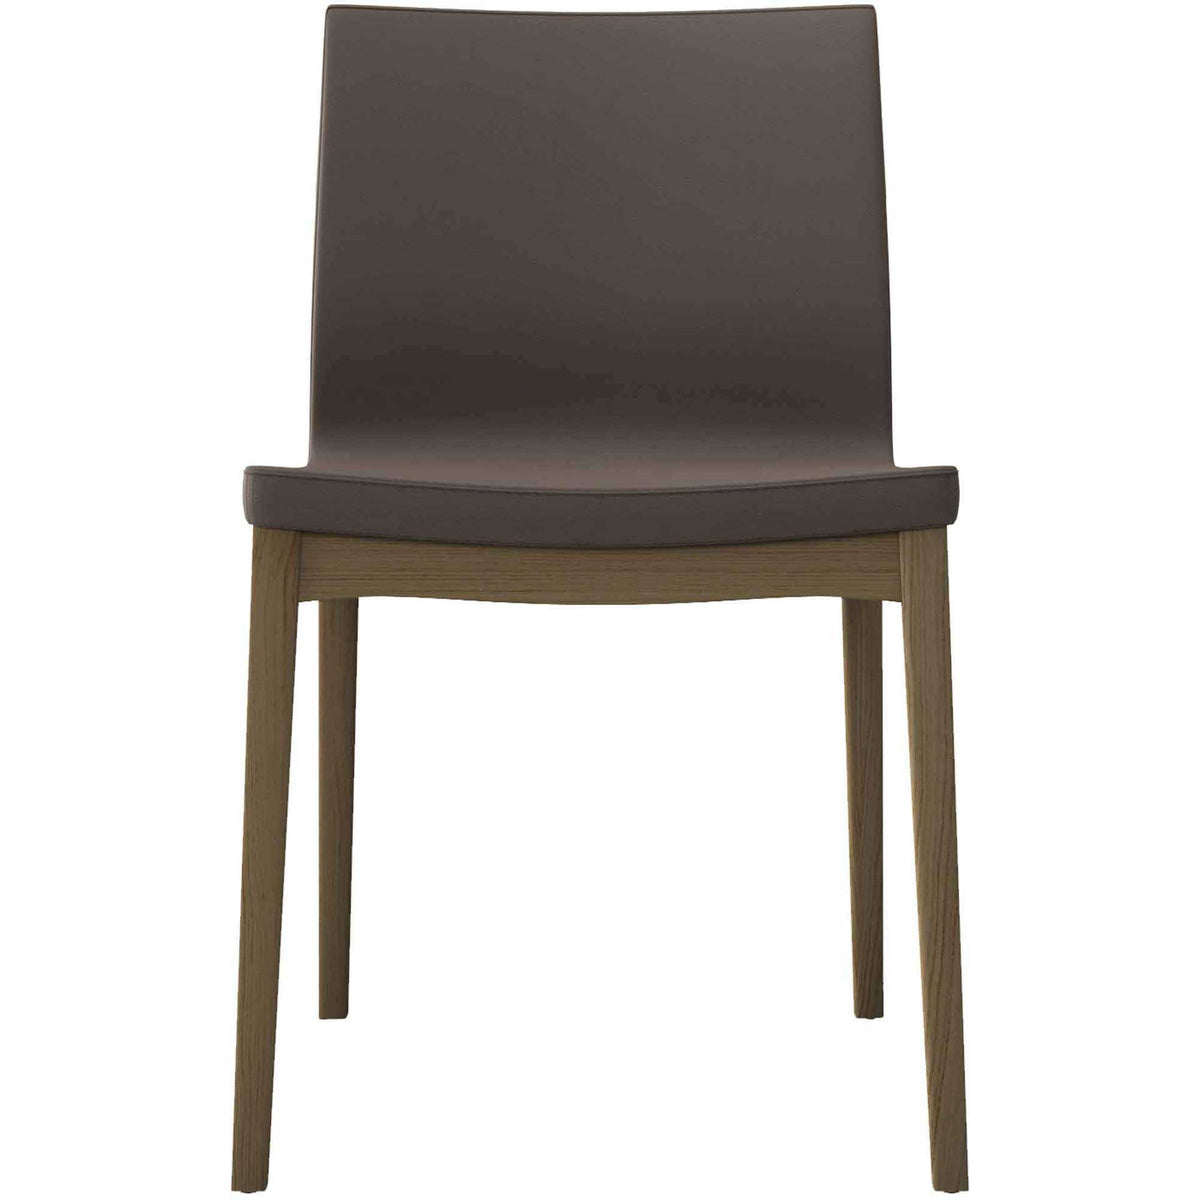 Enna Dining Chair Dove Gray/Natural Oak (Set of 2)